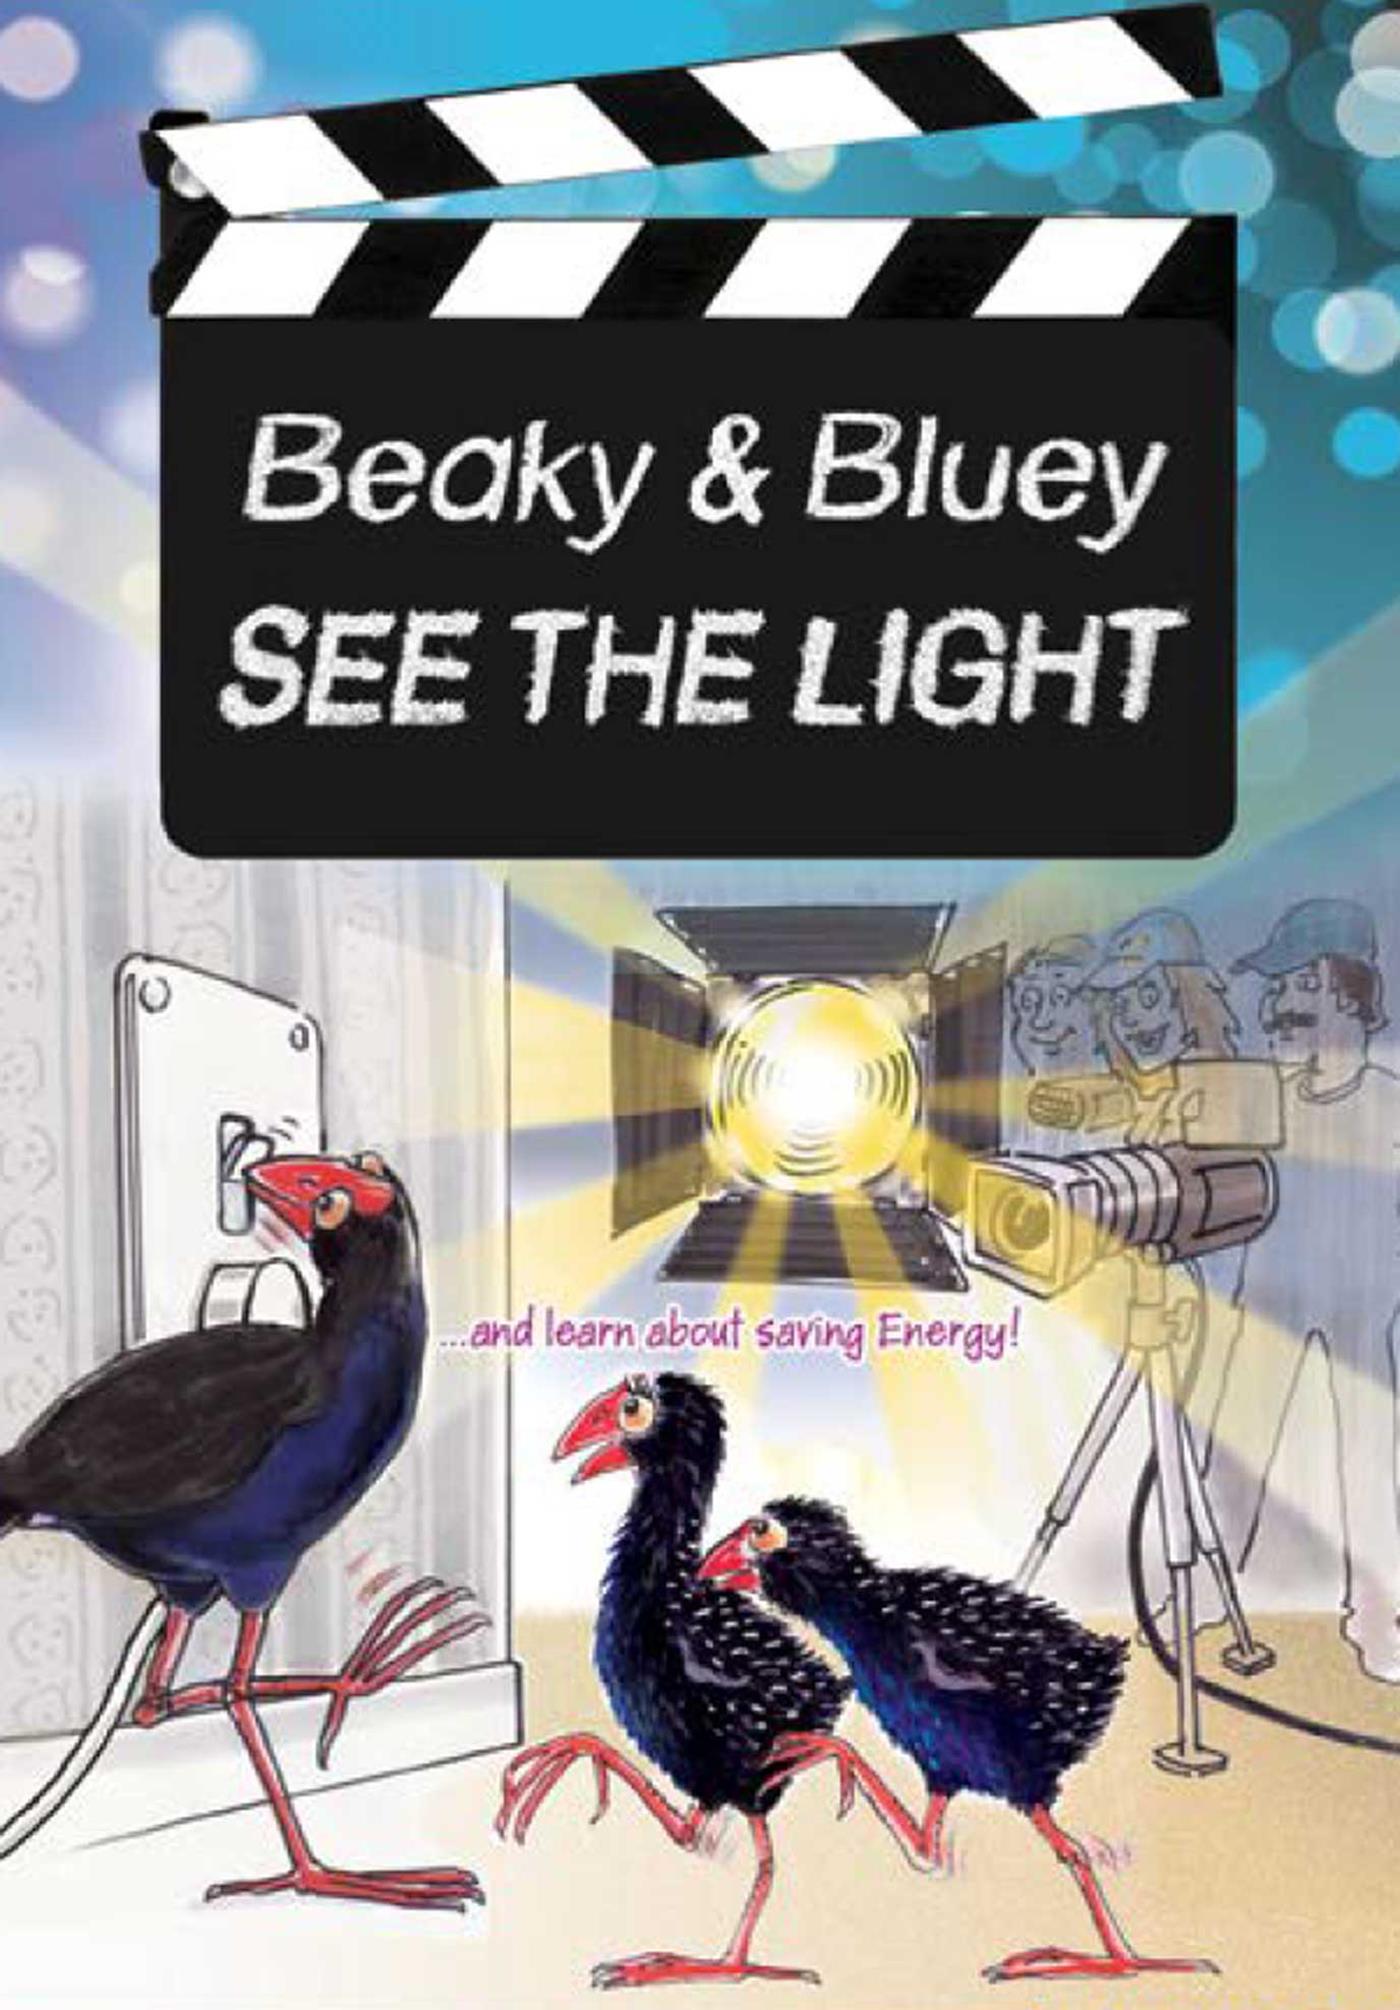 Beaky & Bluey See The Light ebook cover image